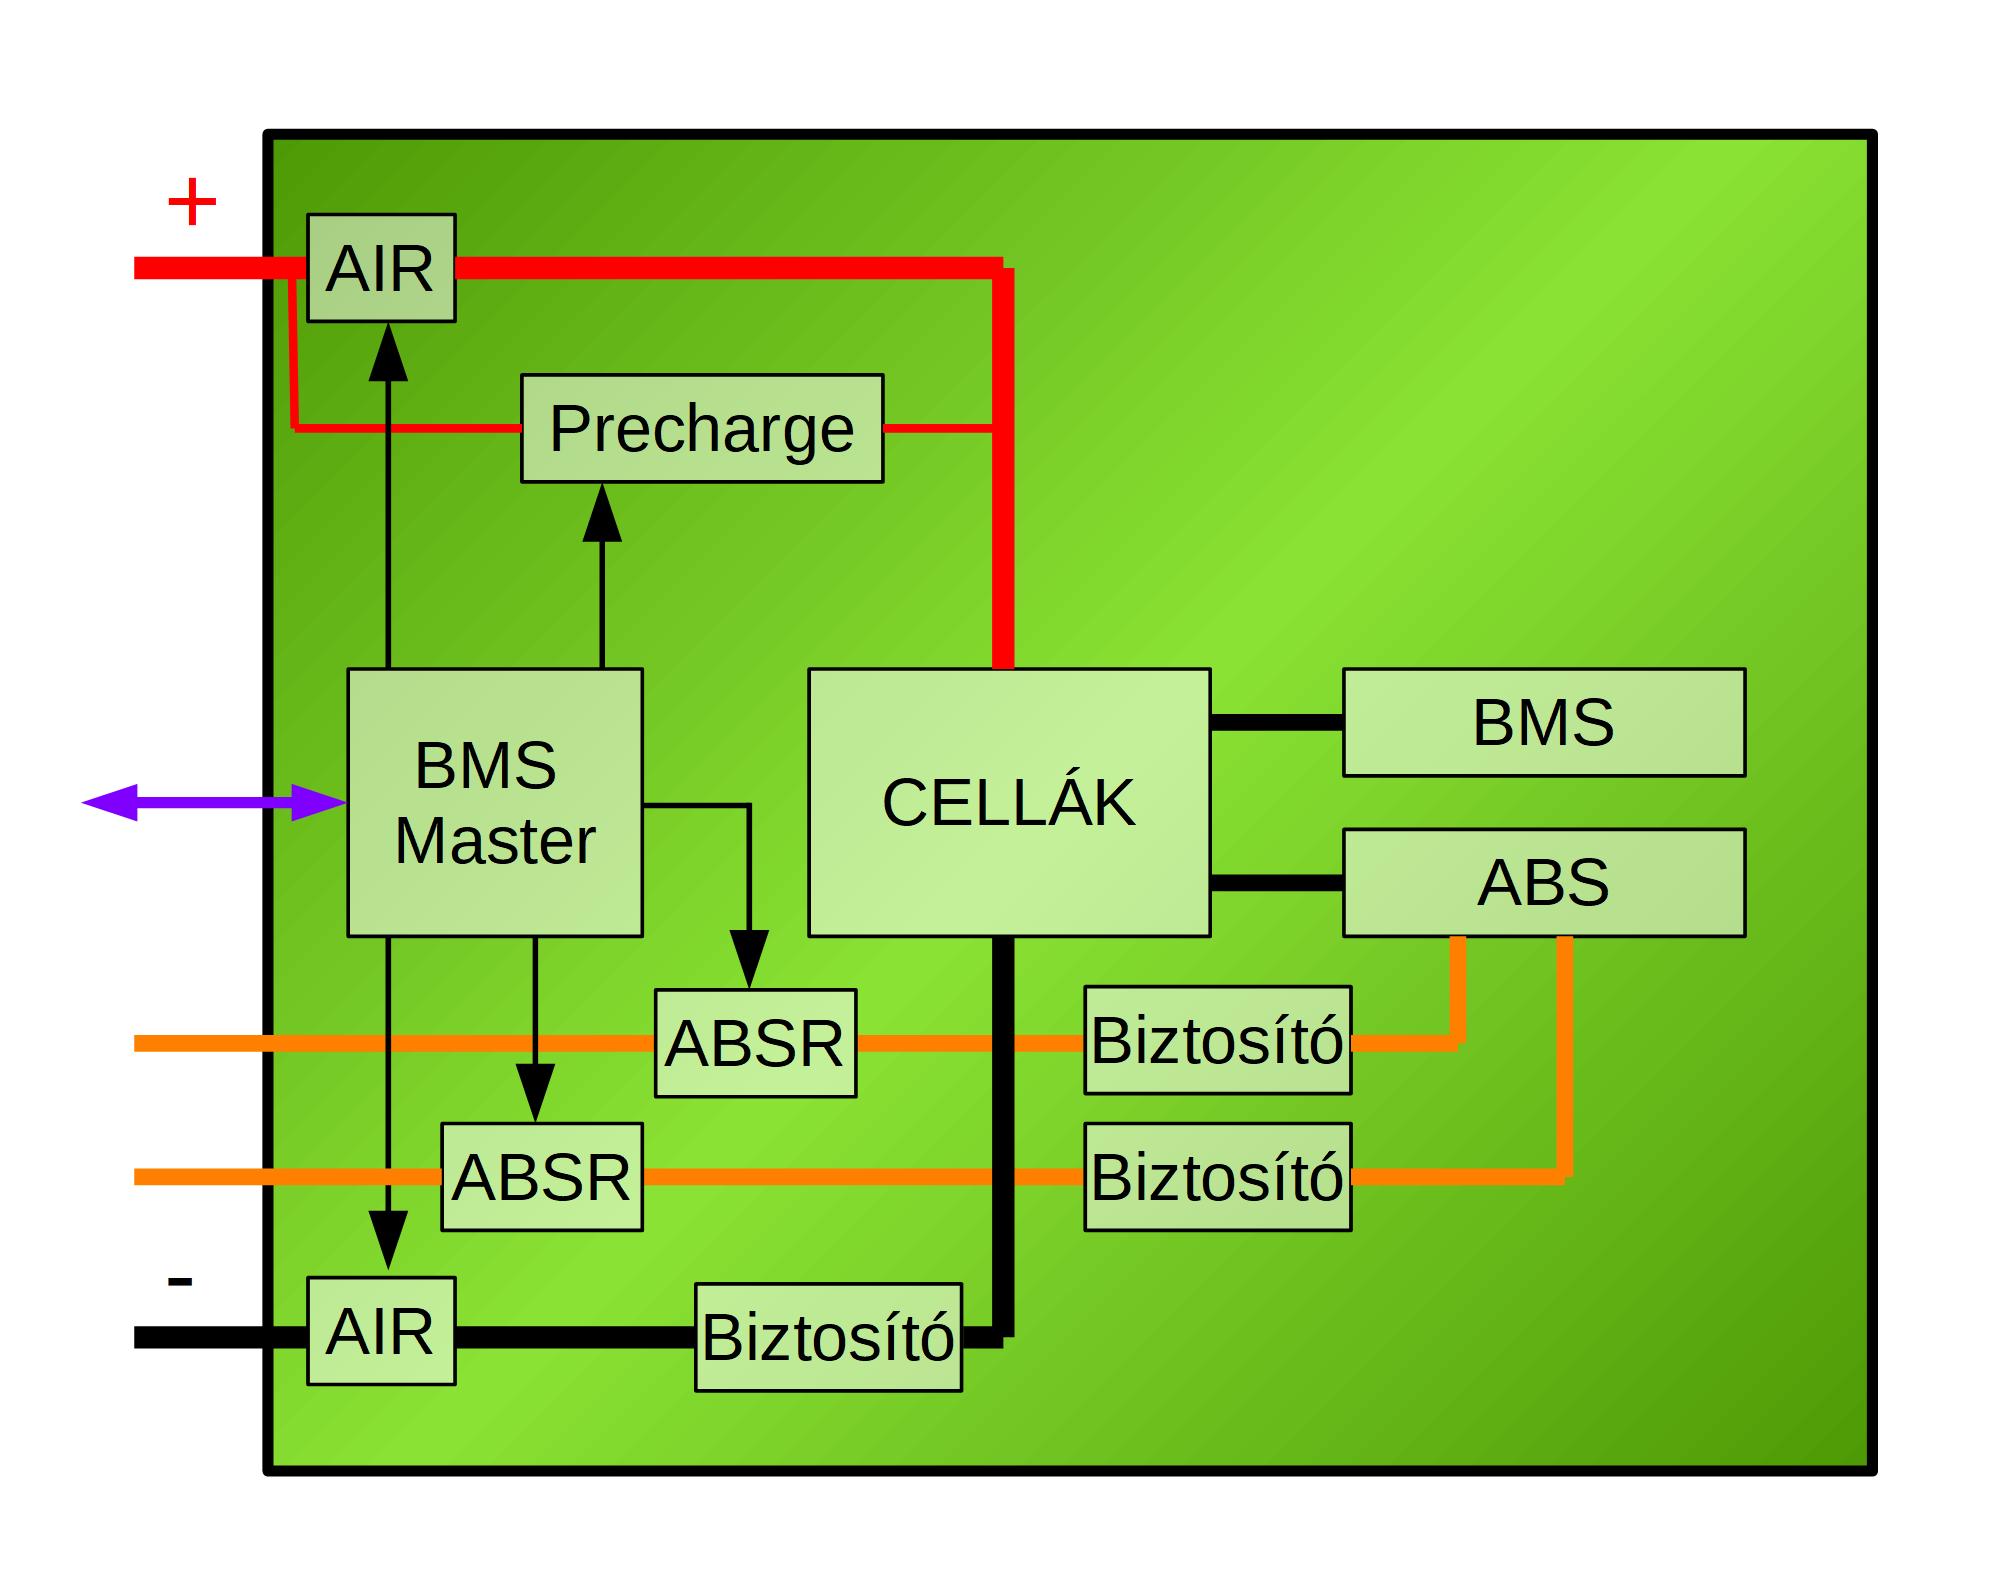 06_battery_wires_fuse_airp_airn_precharge_absr.jpg